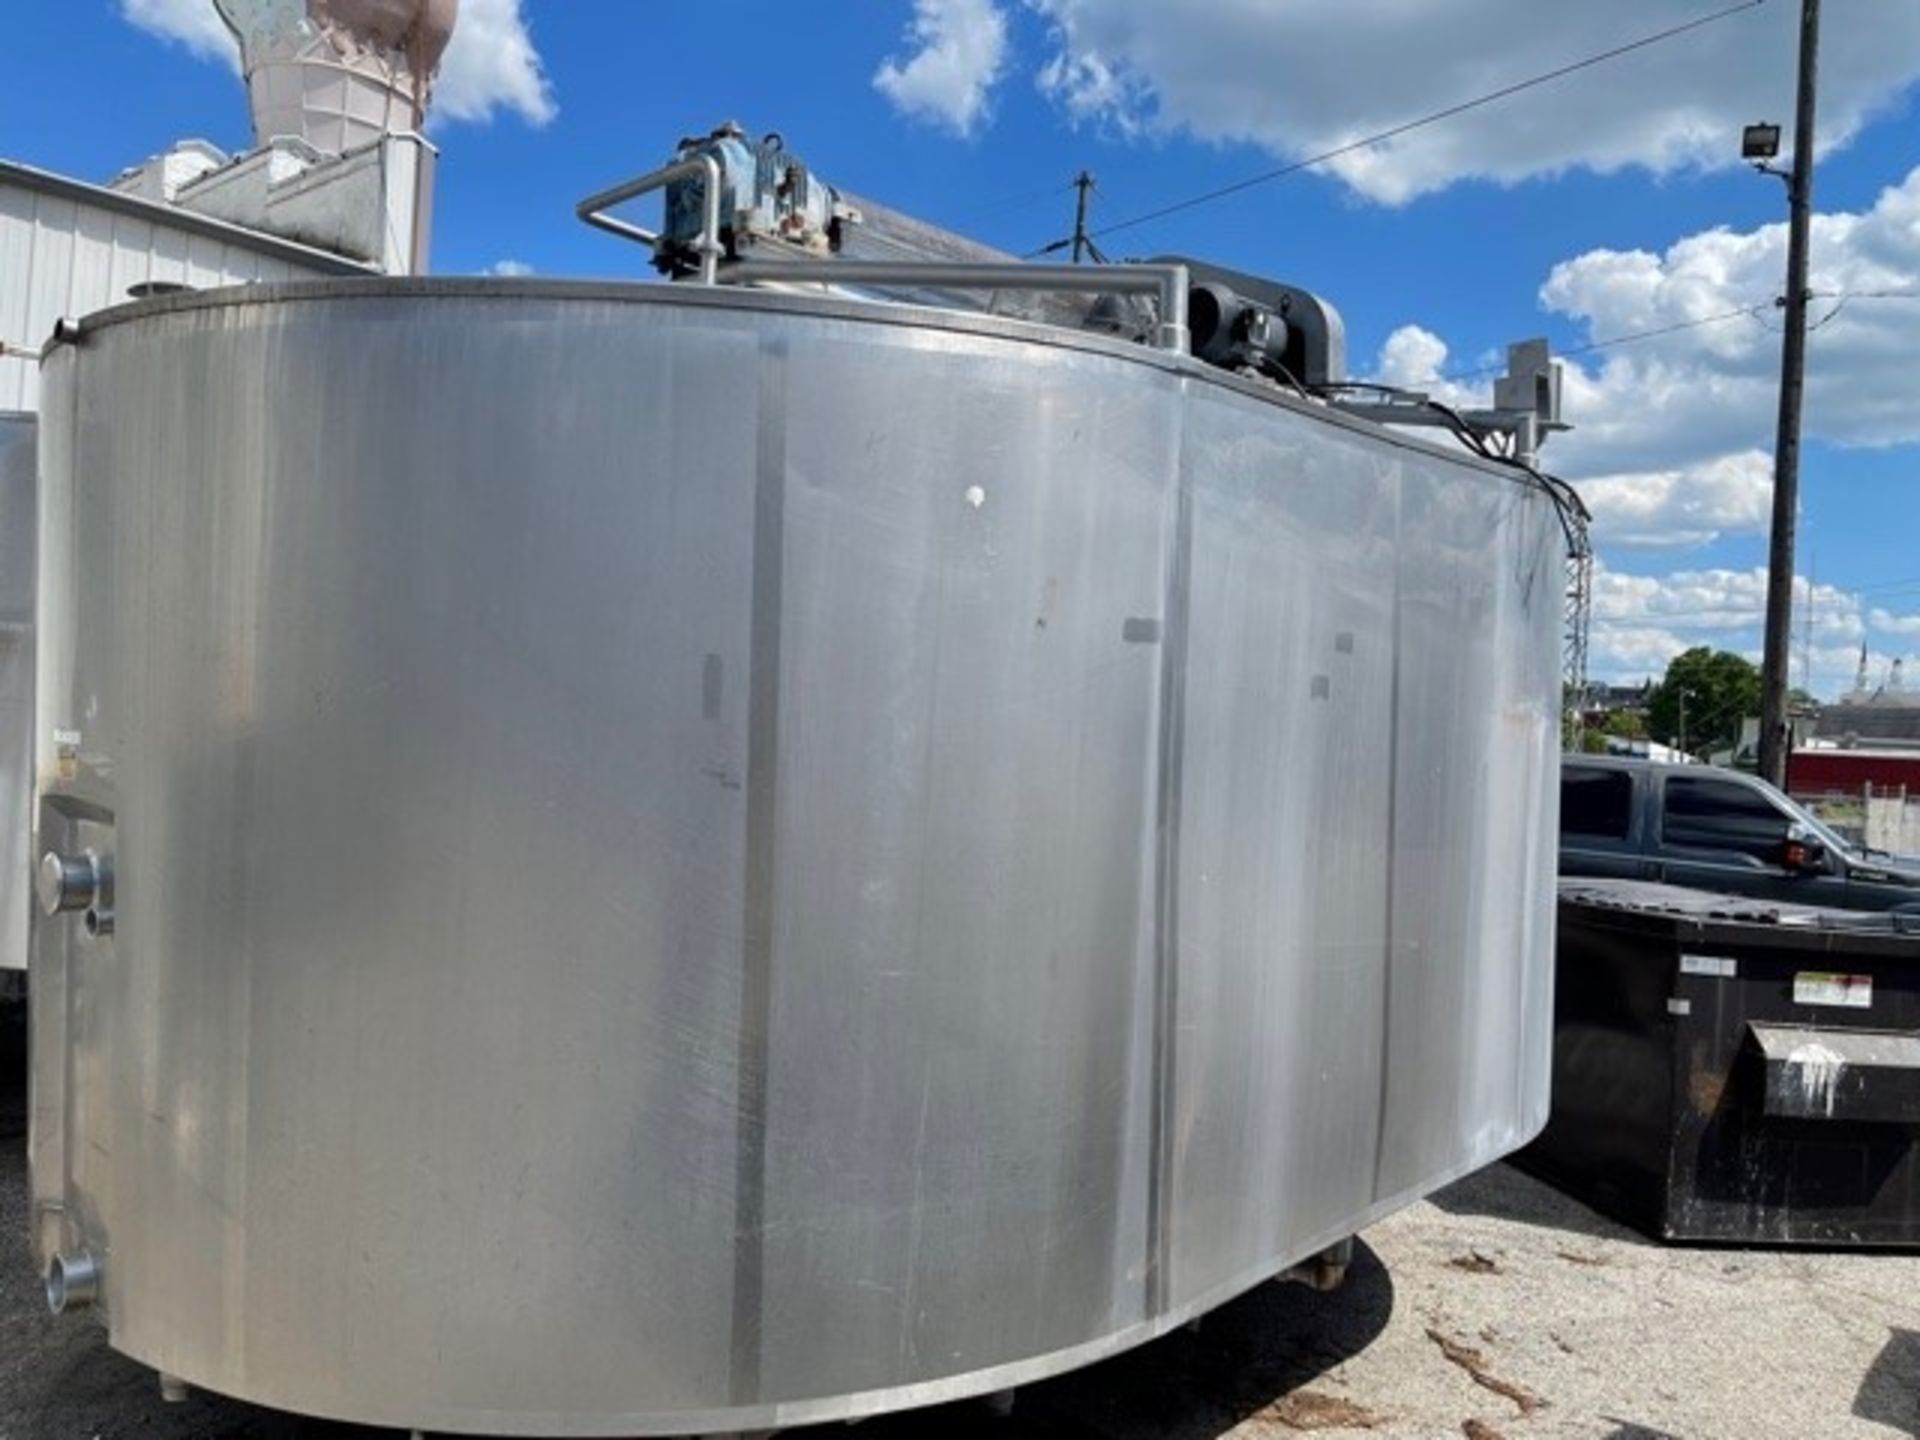 Aprox. 45,000 lb. Capacity Double O Vat, Dimensions Aprox. 12 ft. tall x 10 ft. wide x 16 ft. - Image 4 of 6